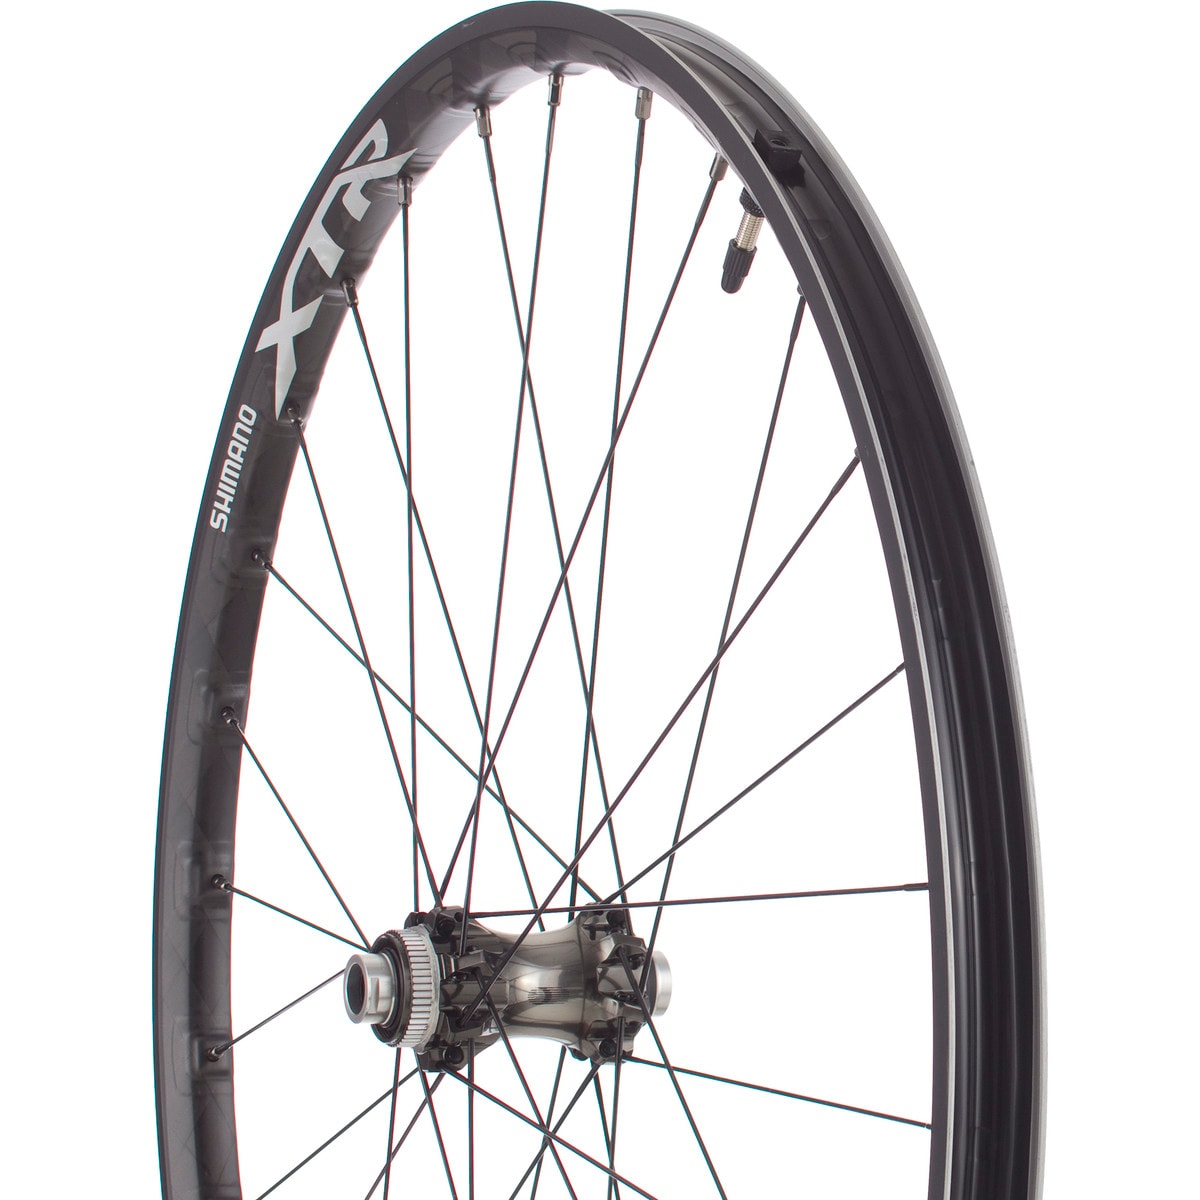 Shimano XTR WH M9020 TL 275in Wheelset